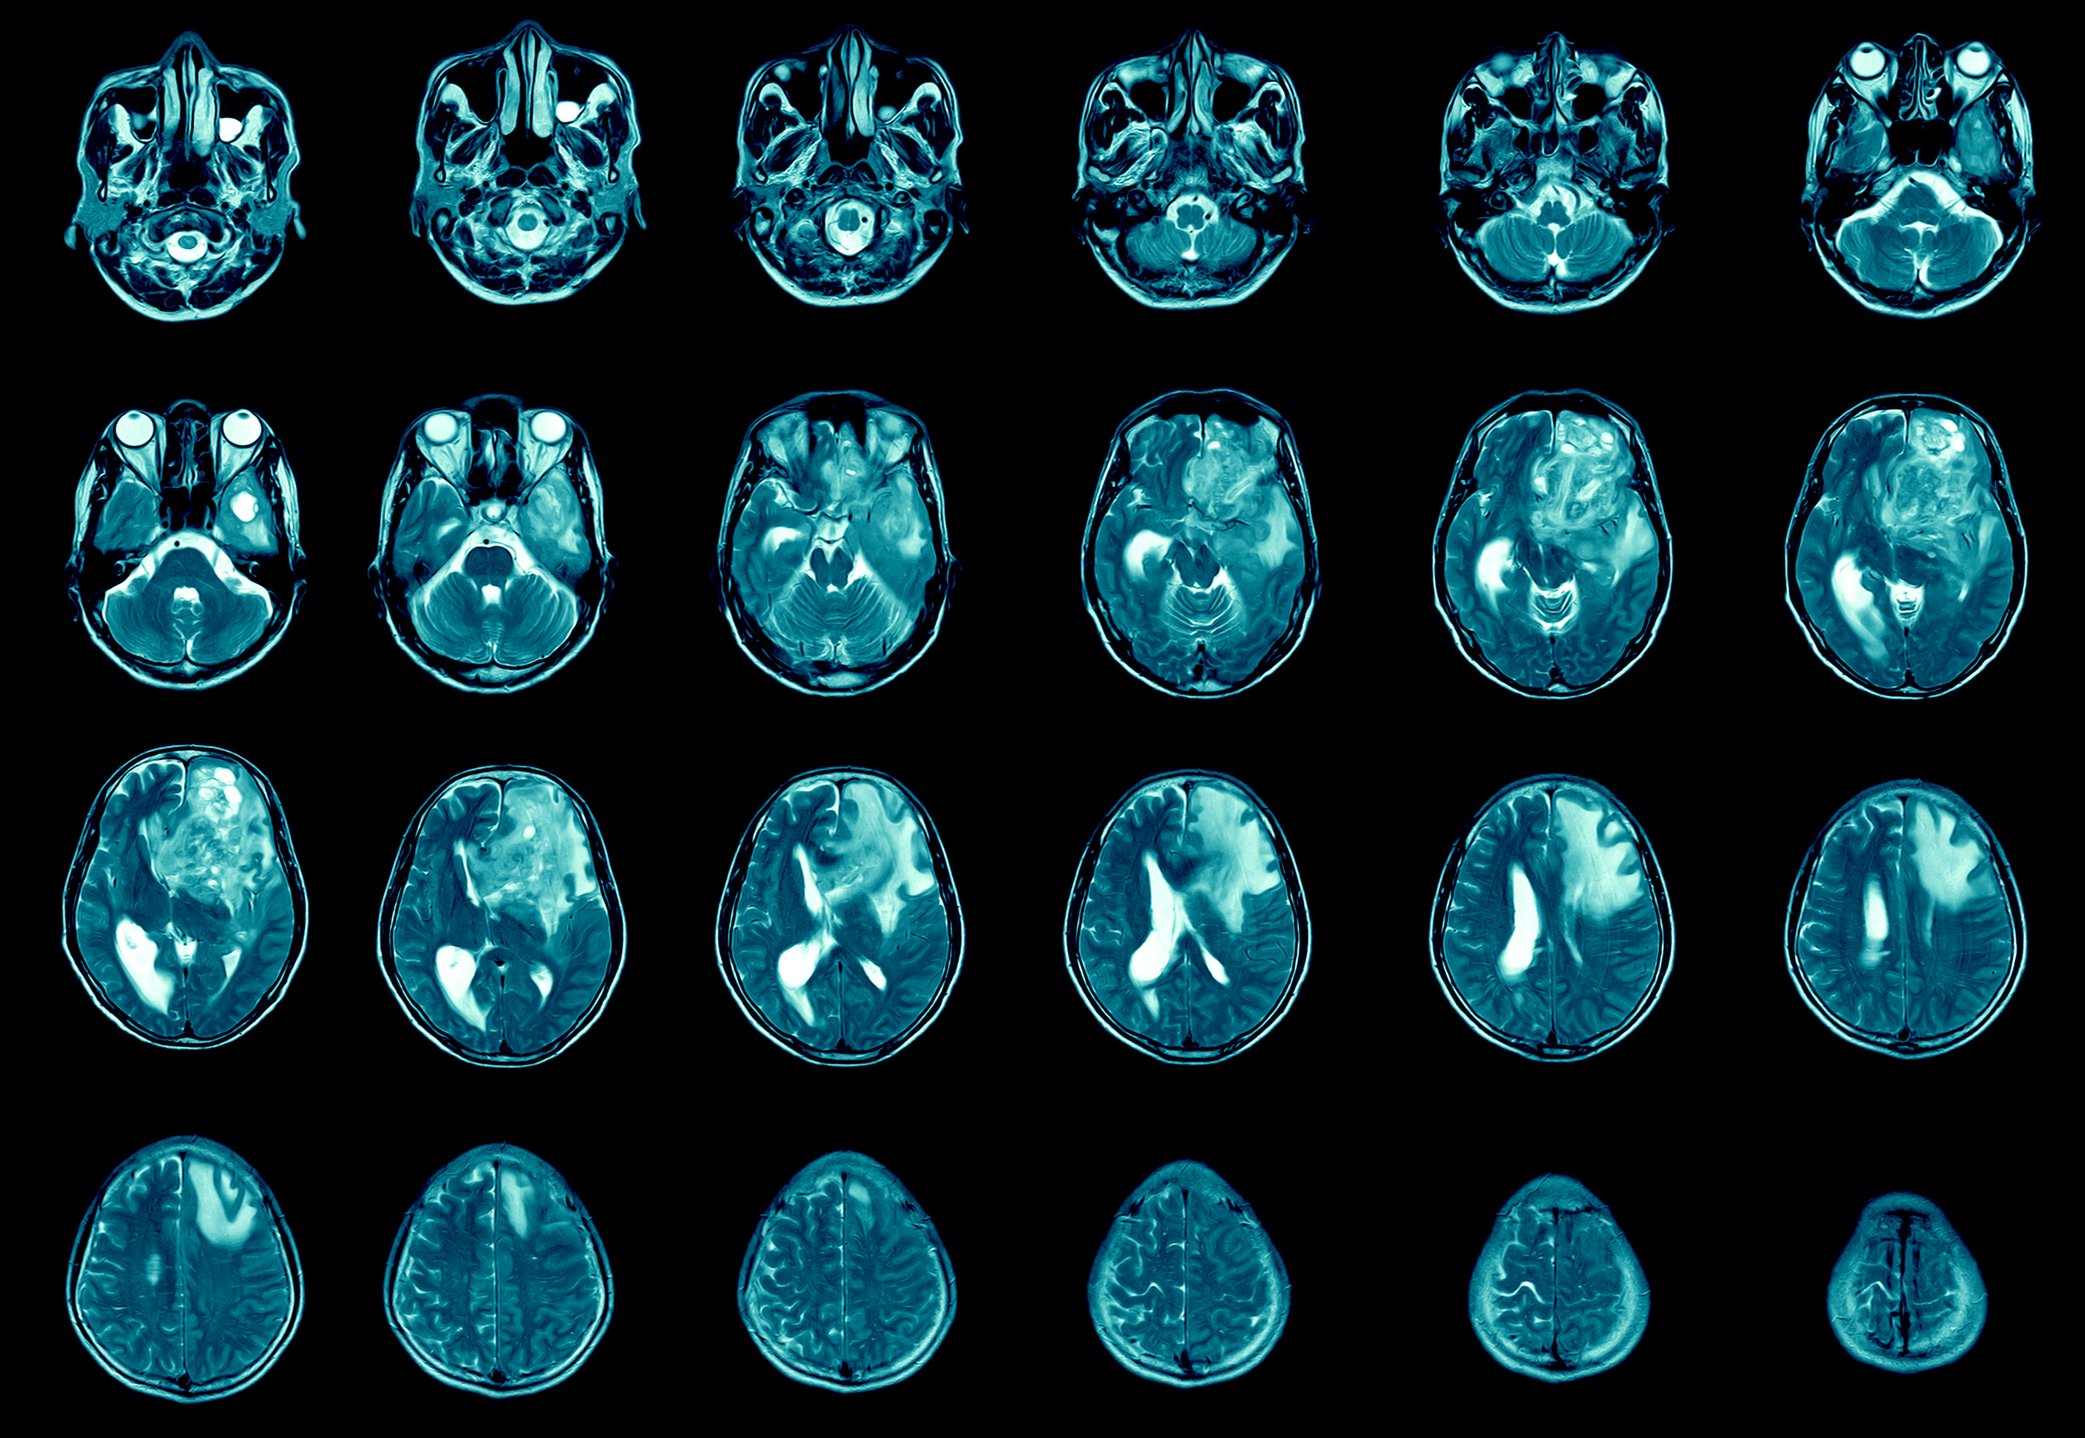 MRI scans depicting glioblastoma with poorly-defined margins and surrounding edema in the left frontal lobe